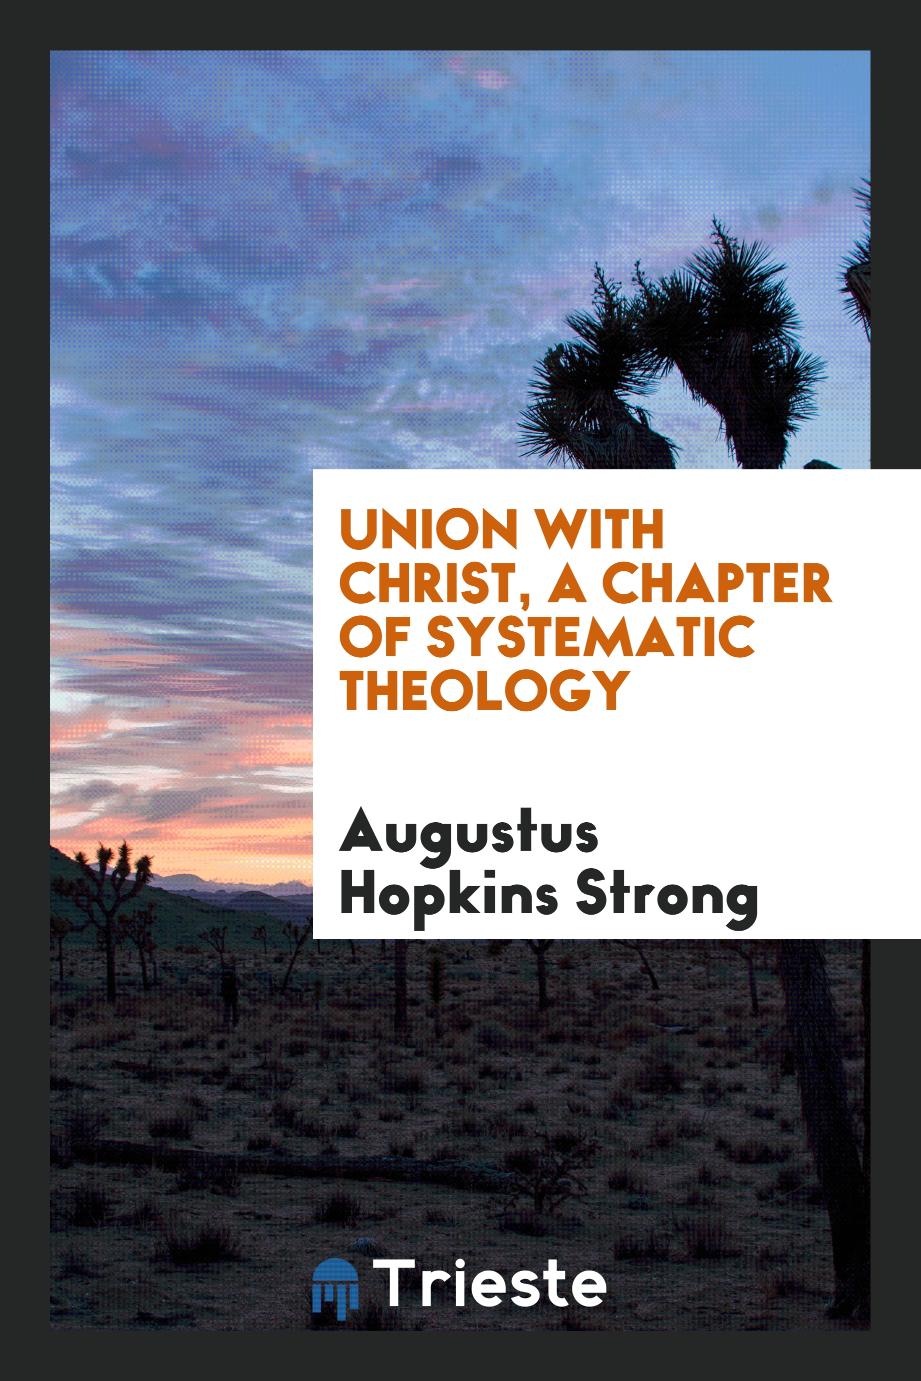 Union with Christ, a chapter of systematic theology